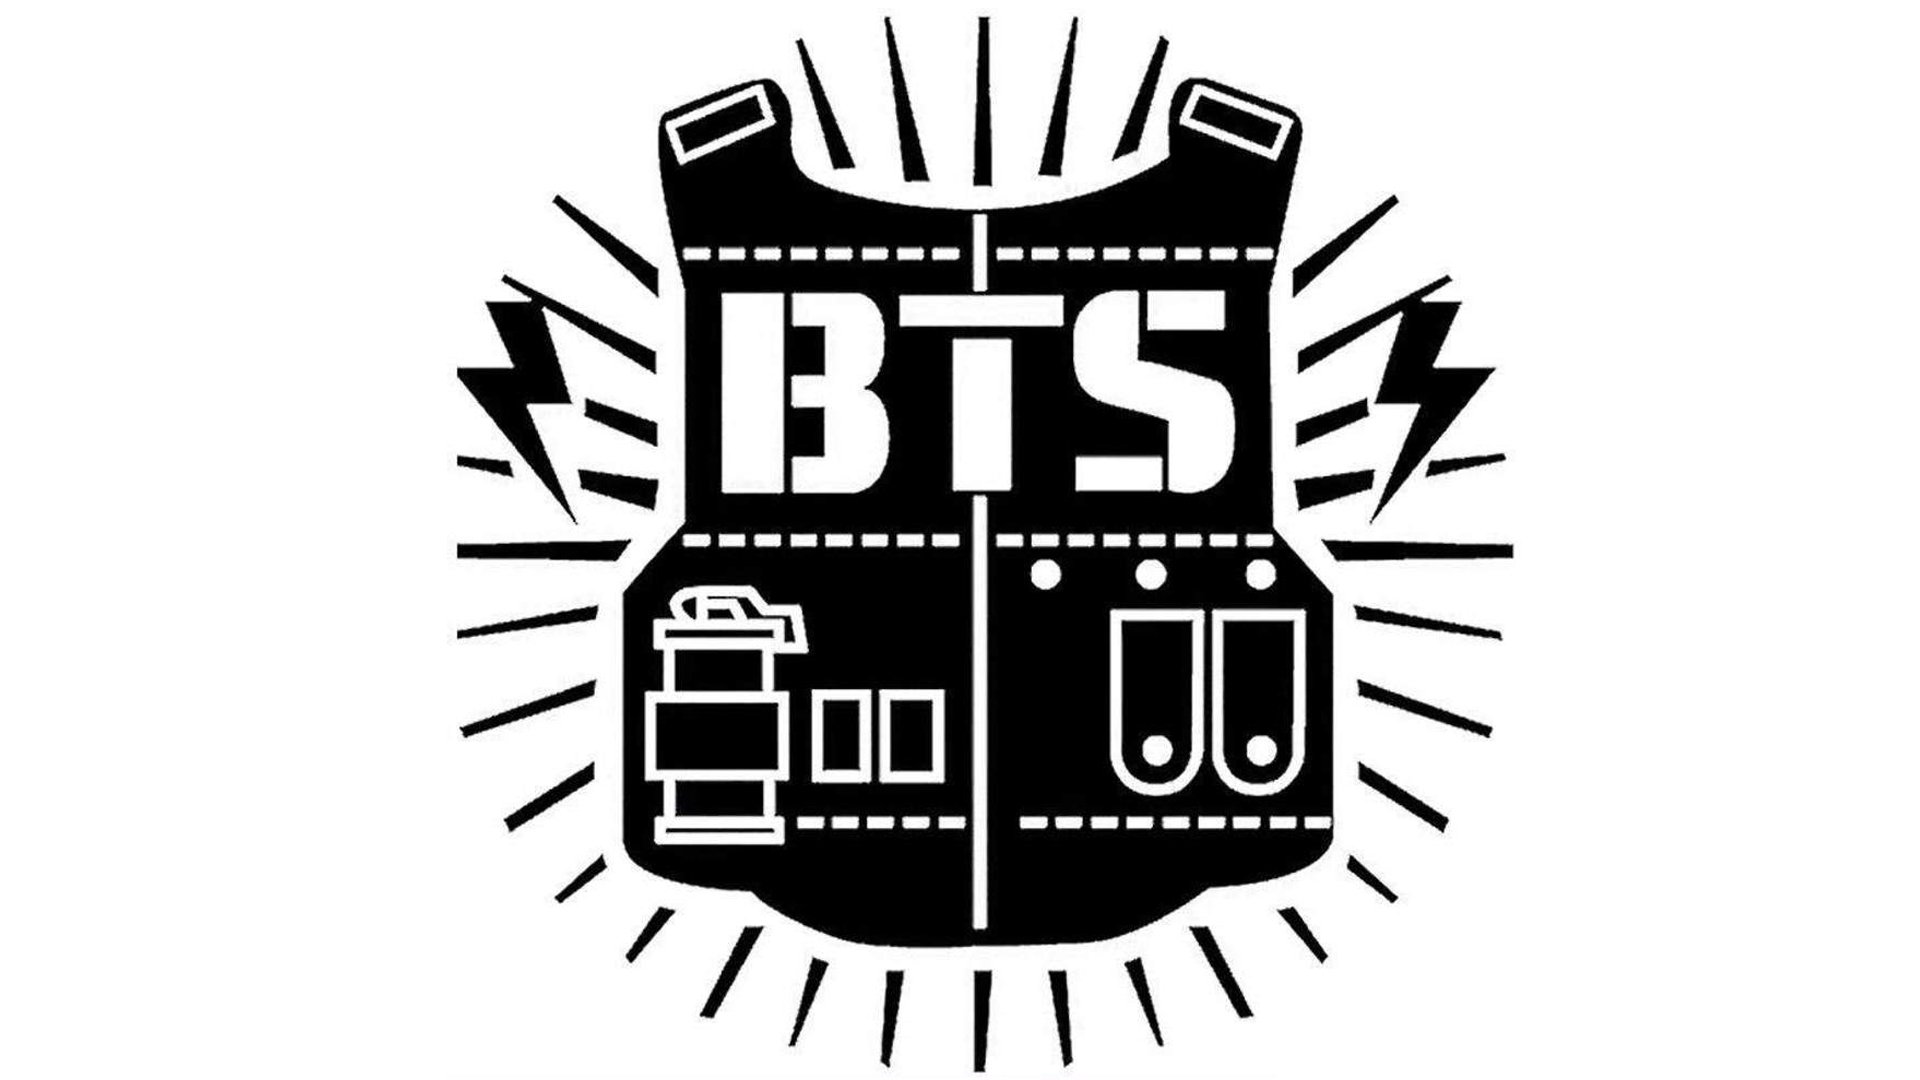 BTS Logo, symbol meaning, History and Evolution